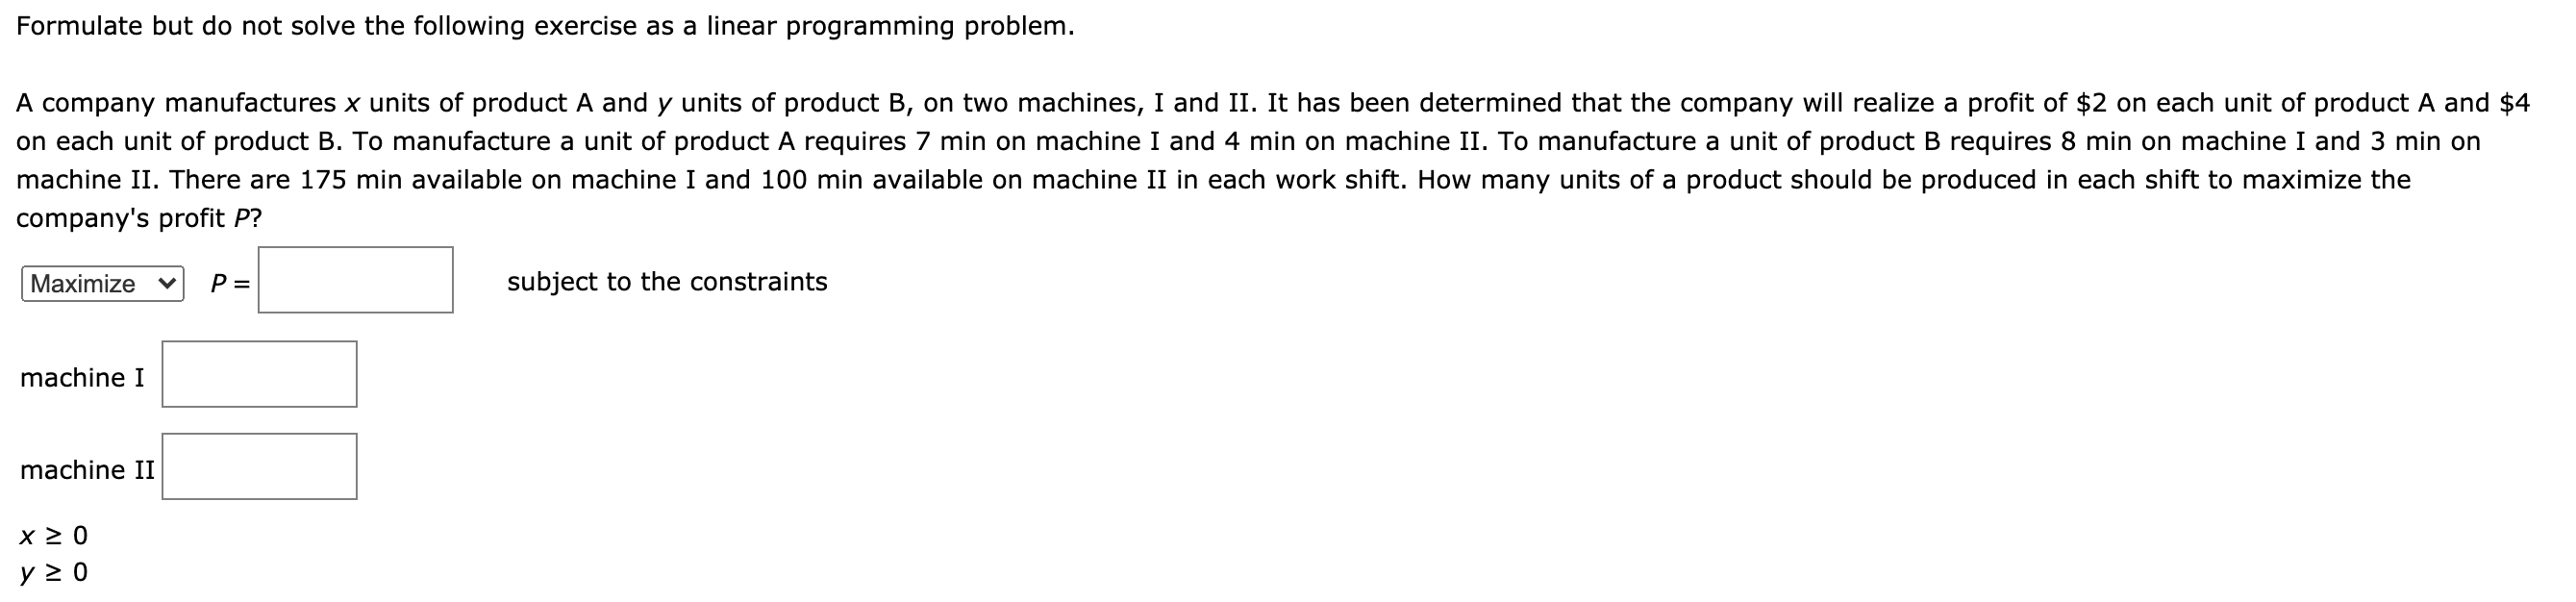 Formulate but do not solve the following exercise as a linear programming problem.
A company manufactures x units of product A and y units of product B, on two machines, I and II. It has been determined that the company will realize a profit of $2 on each unit of product A and $4
on each unit of product B. To manufacture a unit of product A requires 7 min on machine I and 4 min on machine II. To manufacture a unit of product B requires 8 min on machine I and 3 min on
machine II. There are 175 min available on machine I and 100 min available on machine II in each work shift. How many units of a product should be produced in each shift to maximize the
company's profit P?
Maximize
P =
subject to the constraints
machine I
machine II
y 2 0
